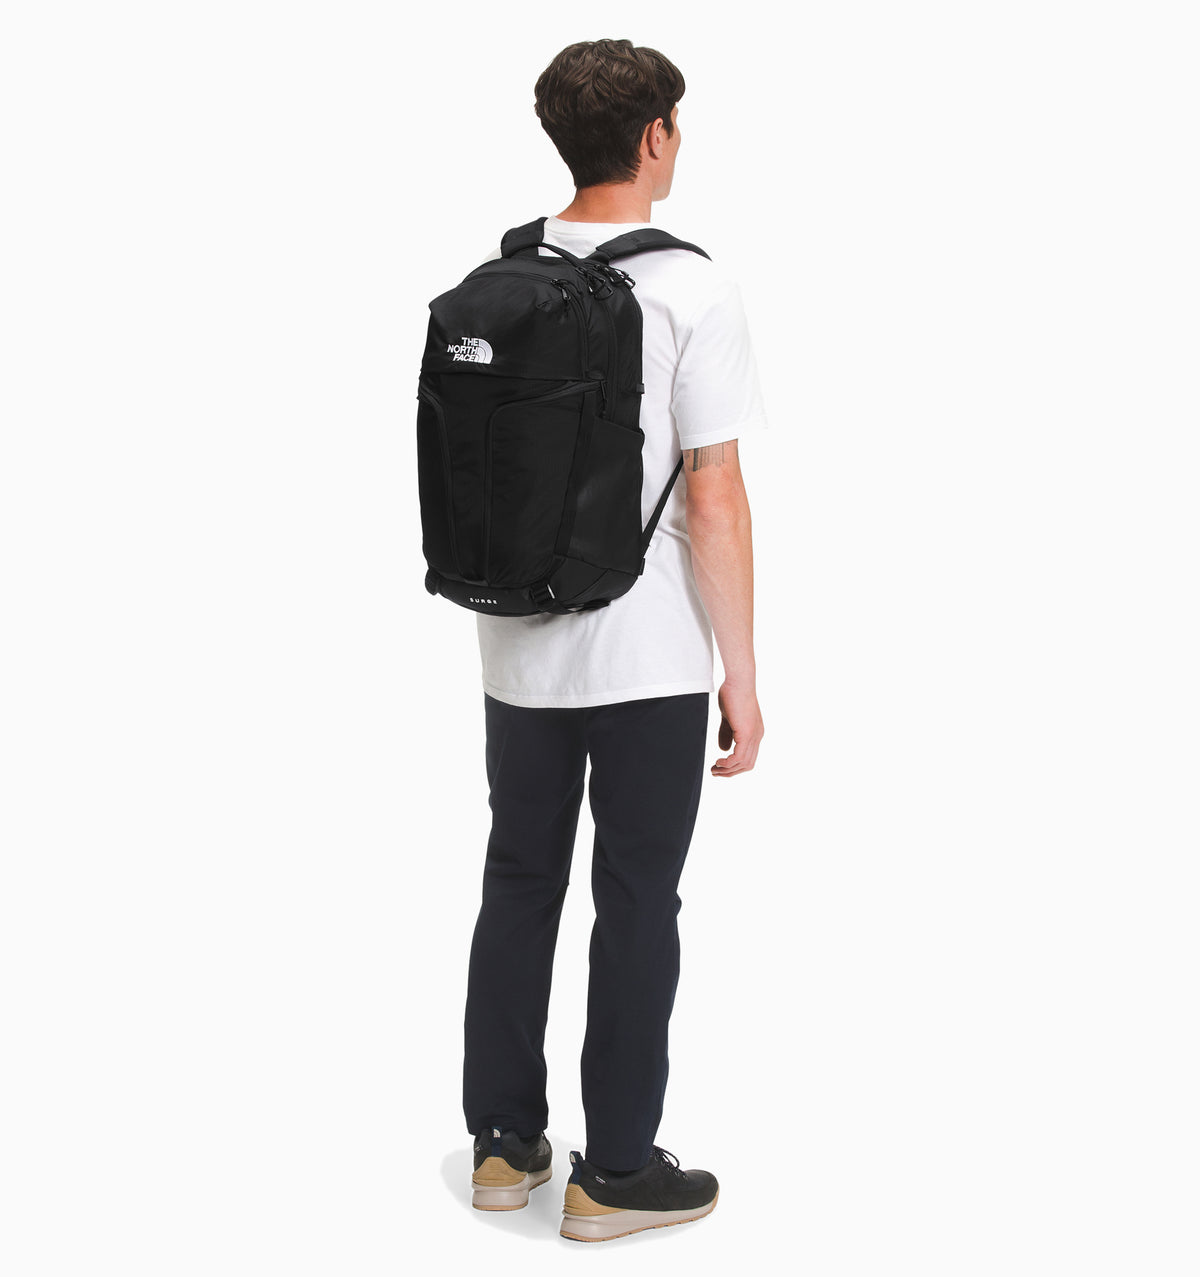 The North Face 15" Surge Laptop Backpack 31L - Black